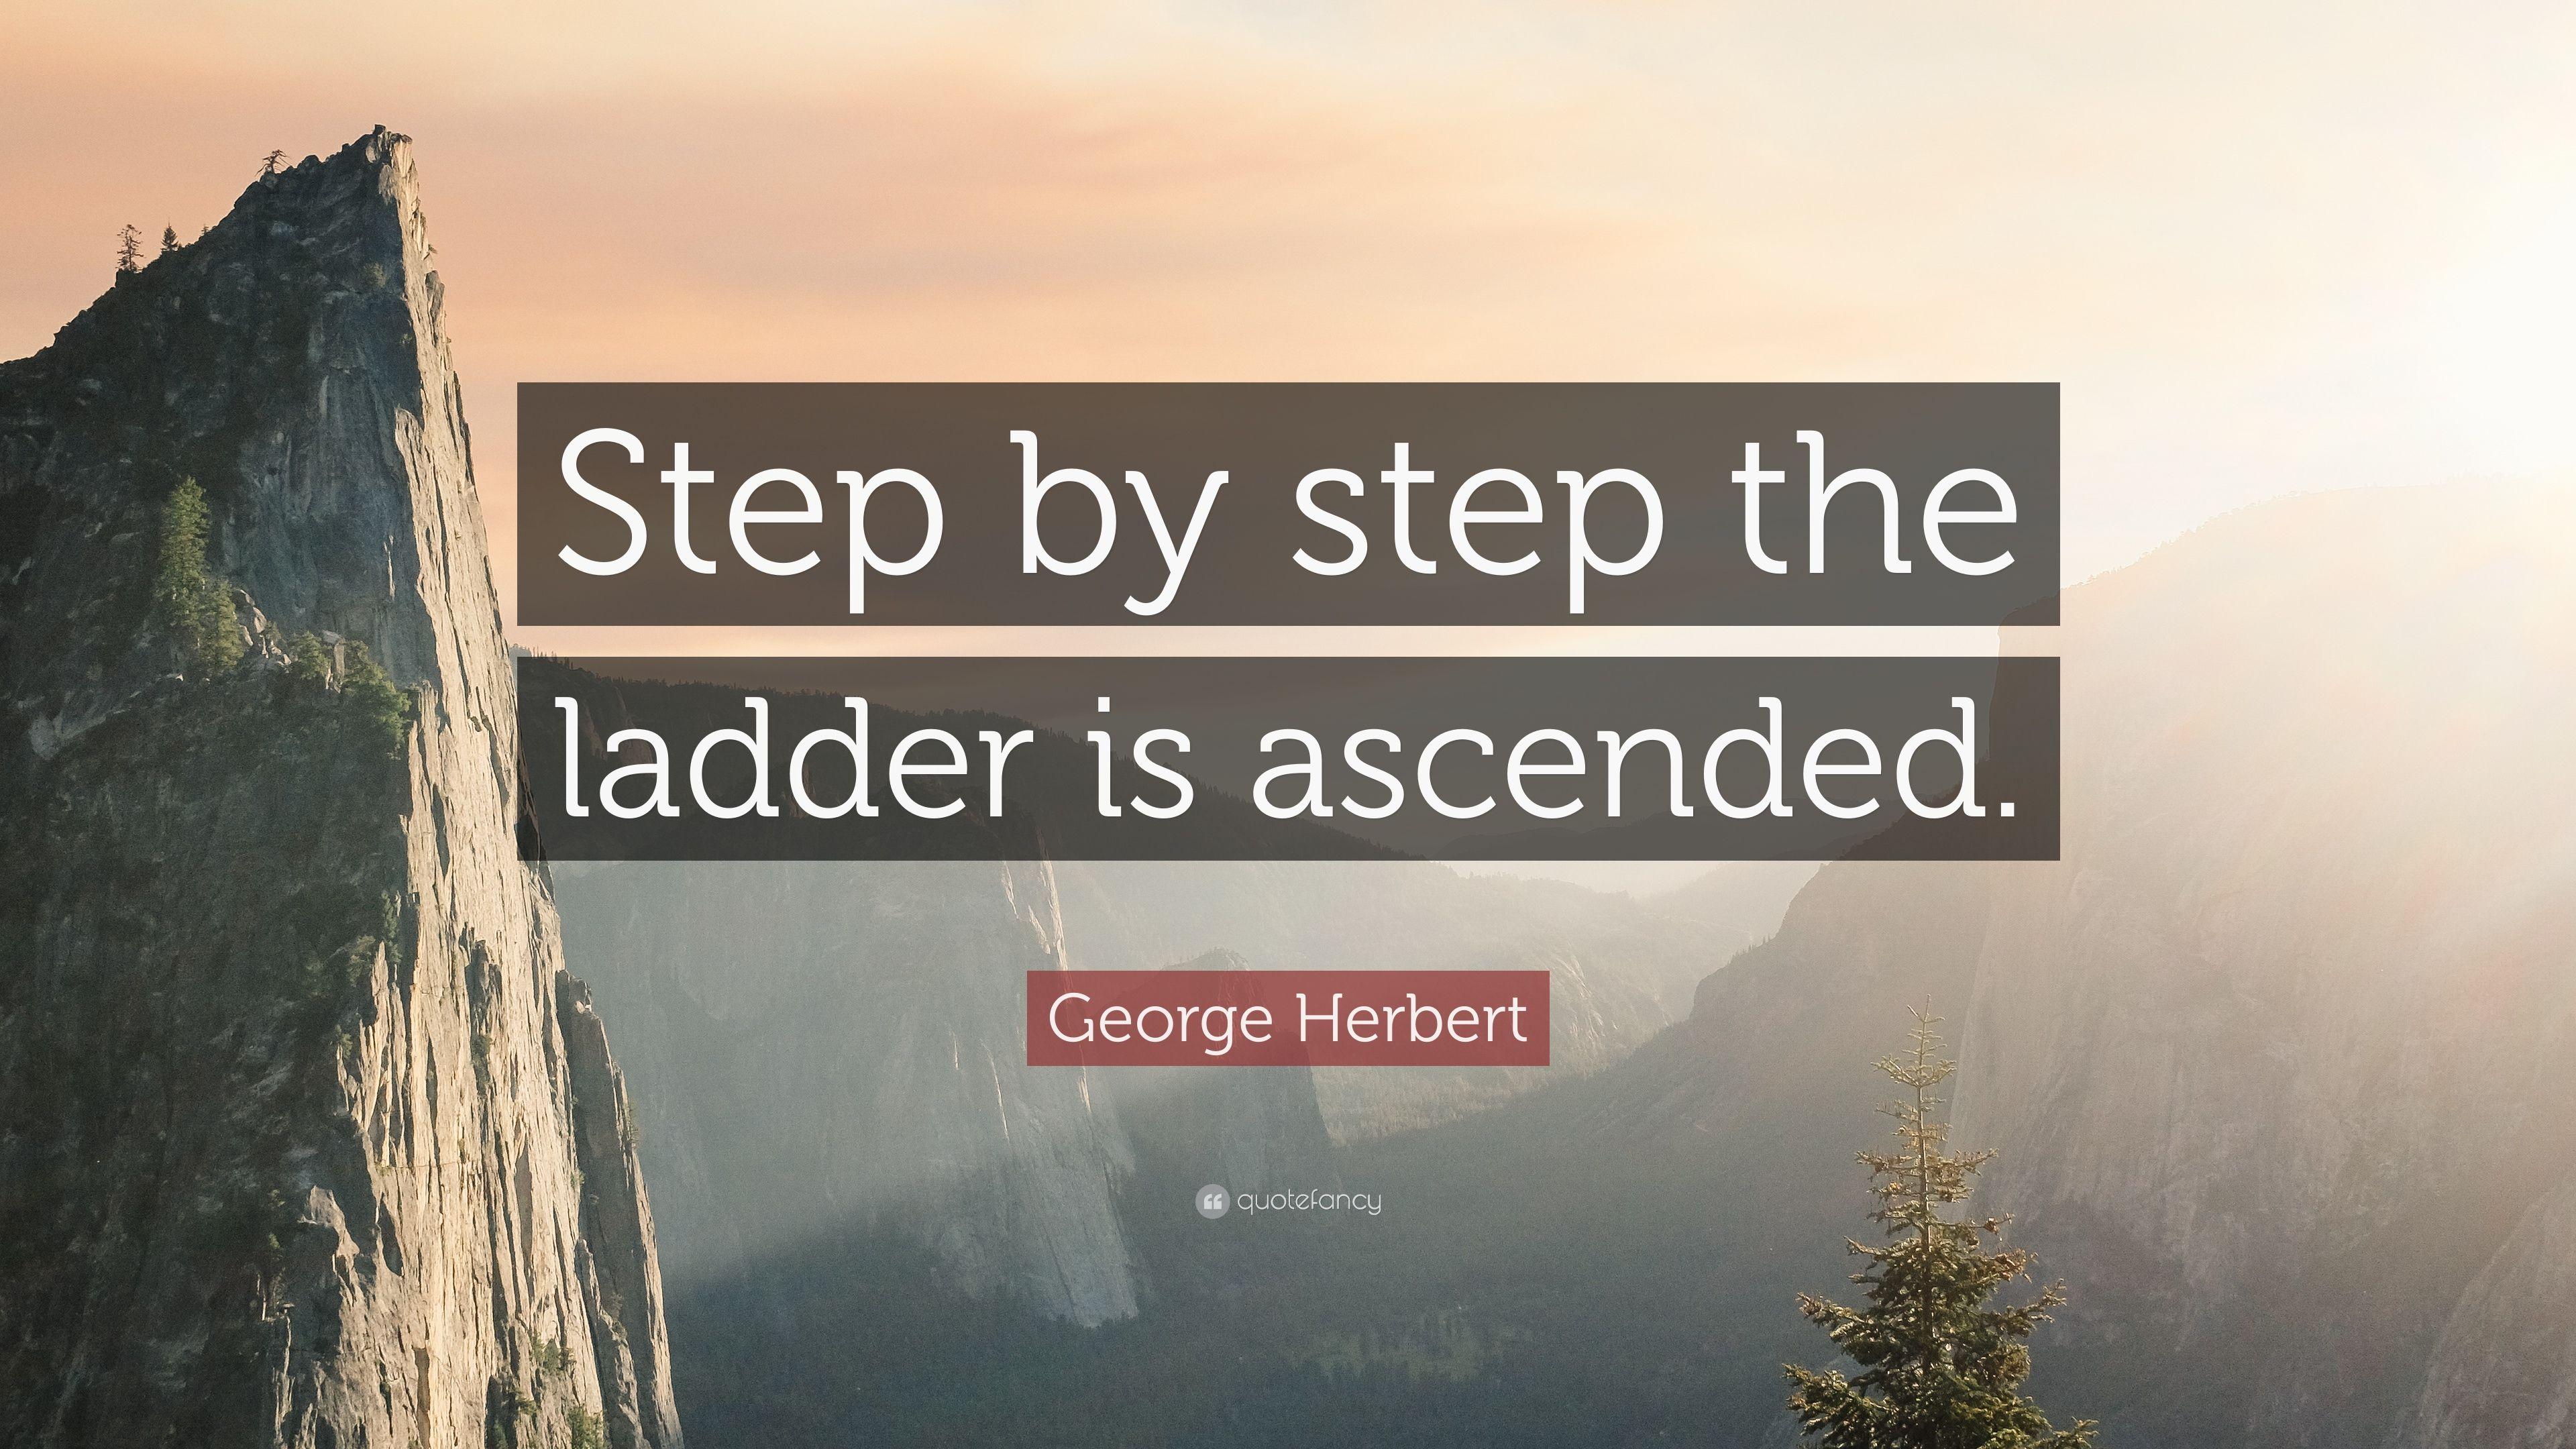 George Herbert Quote: “Step by step the ladder is ascended.” 9